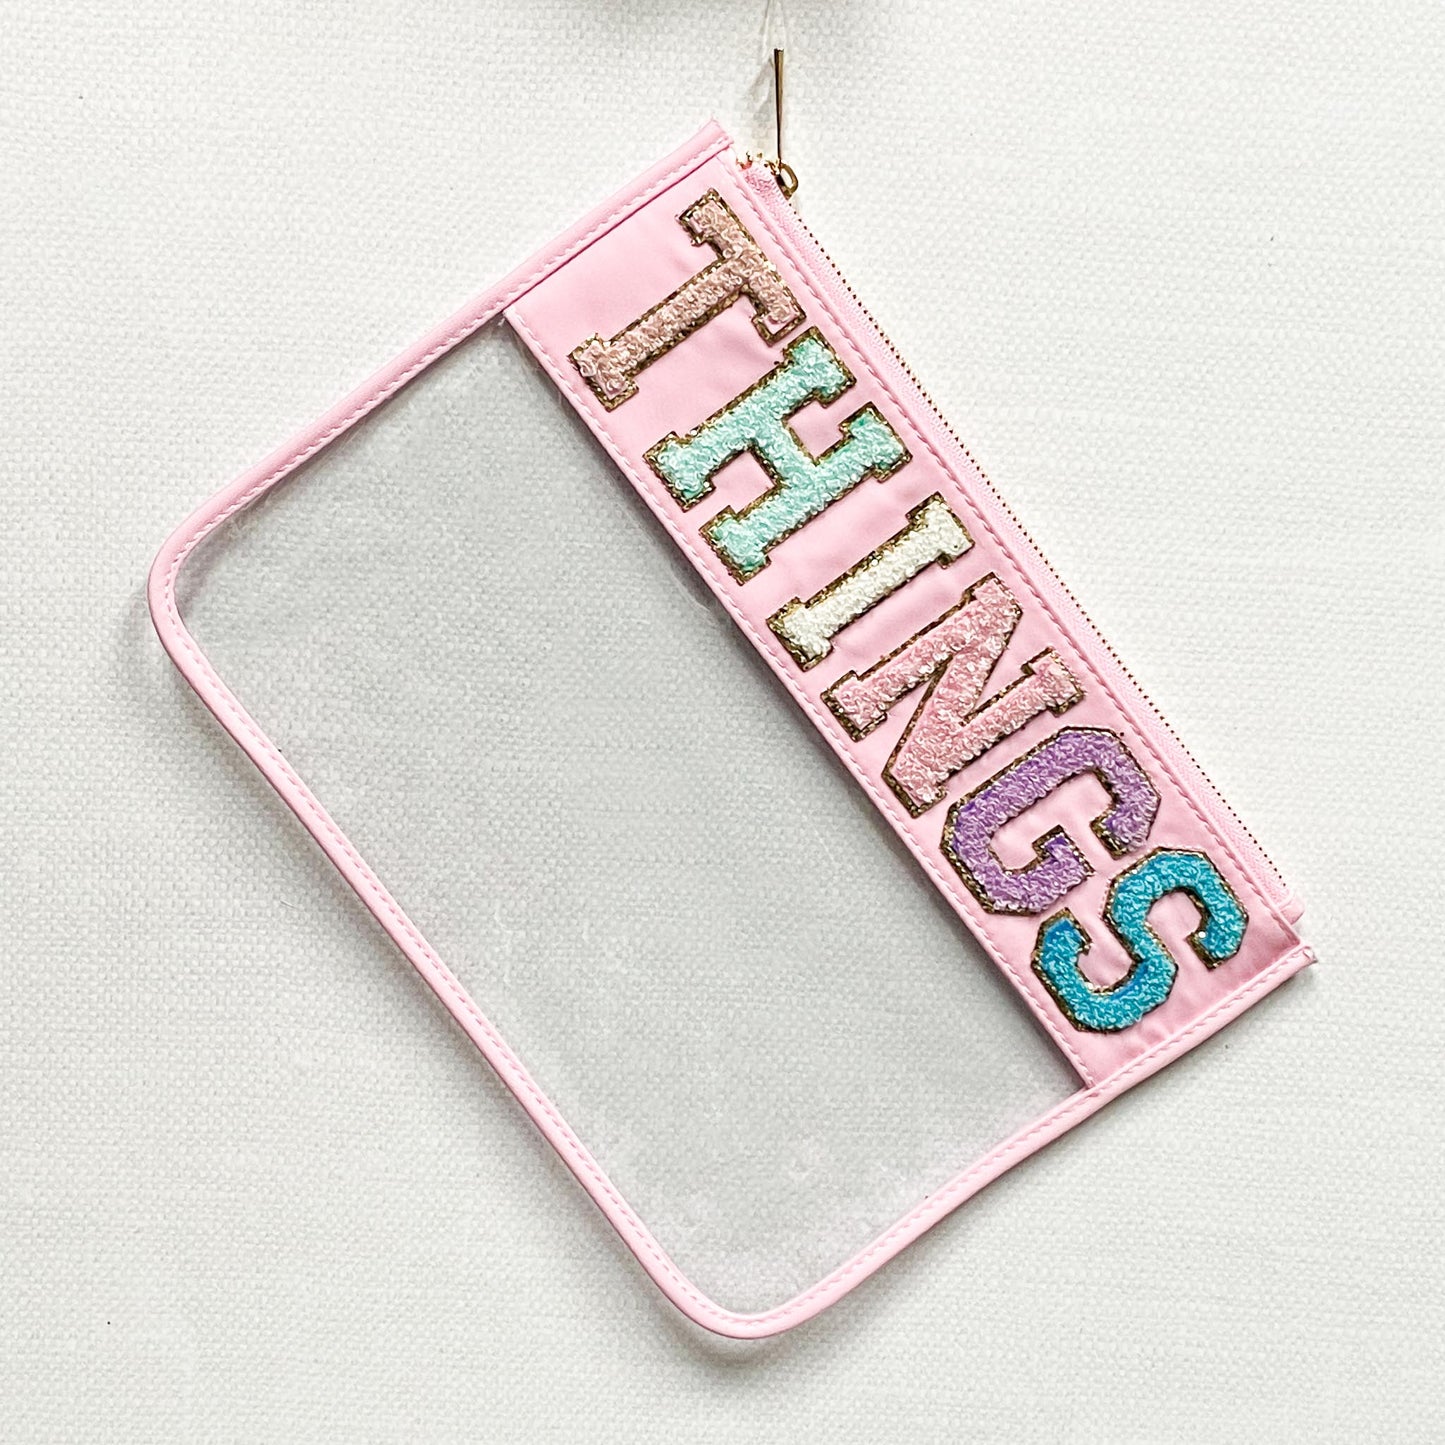 clear nylon bag with pink trim and chenille patches that spell "things".